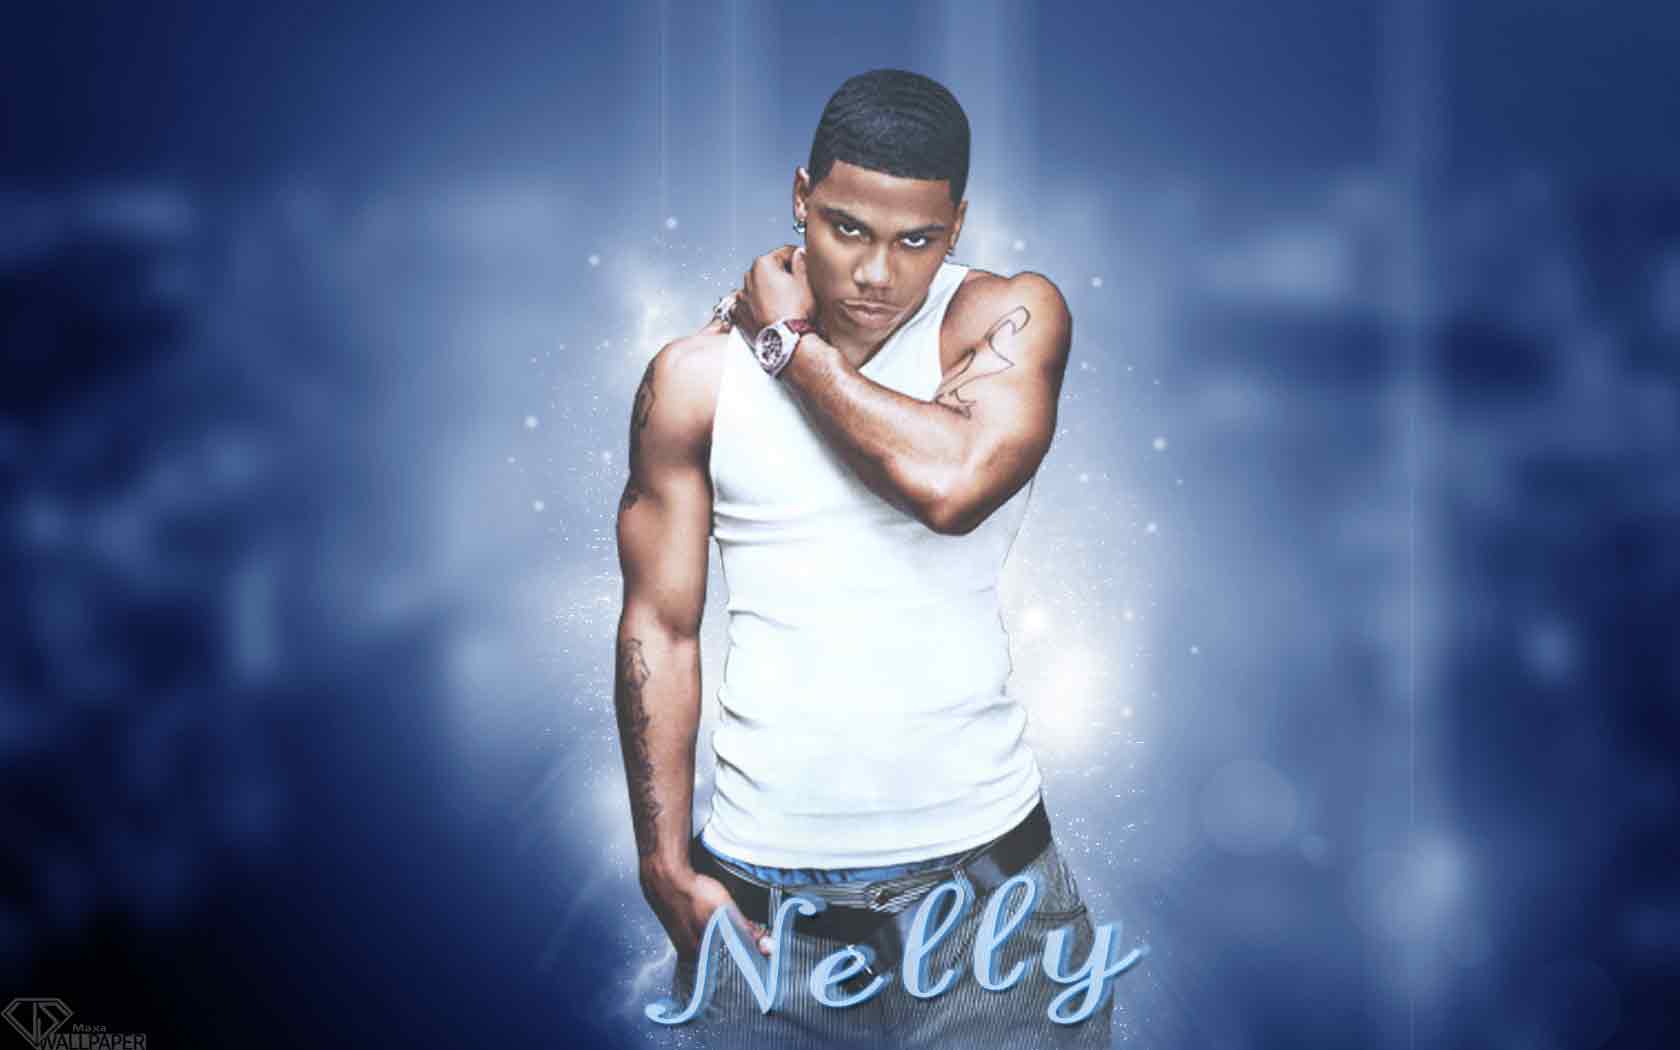 Nelly Celebrity Diet, Workout, And Weight Loss Secrets - How